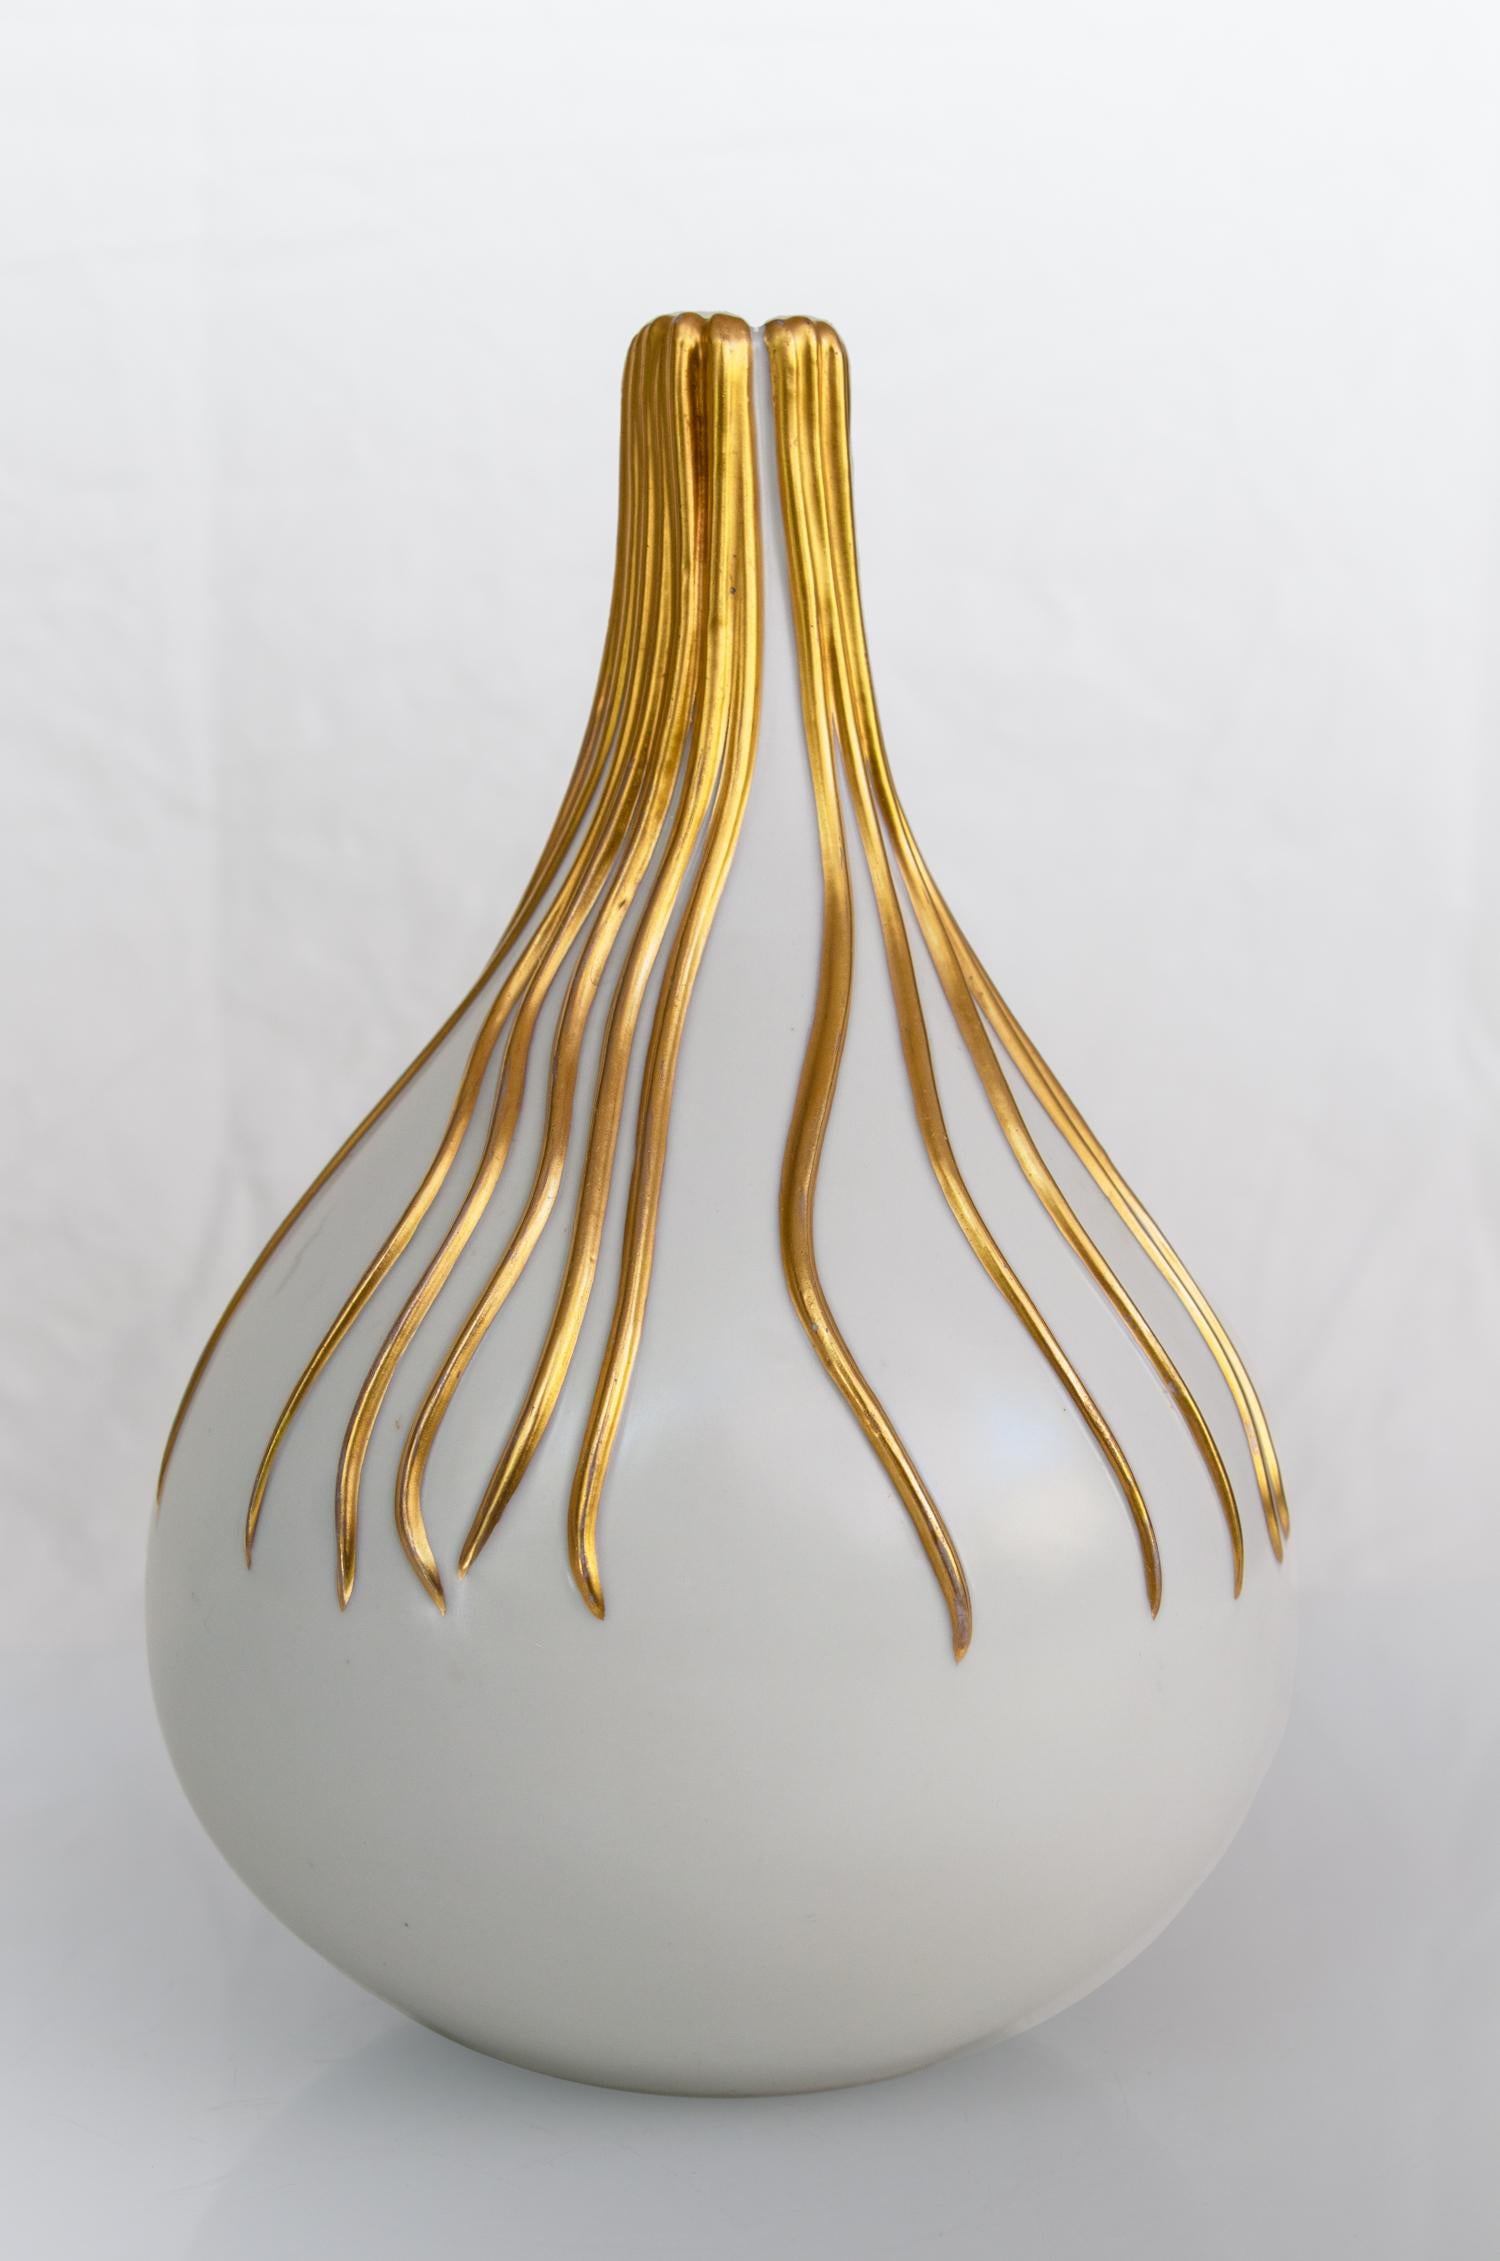 Ceramic vase designed by Giovanni Gariboldi in the 1930's for Richard Ginori, San Cristoforo, Italy.

Bulbous white ceramic vase with a small opening and gold gilding.
Richard - Ginori, one of the most famous porcelain factories in the world,